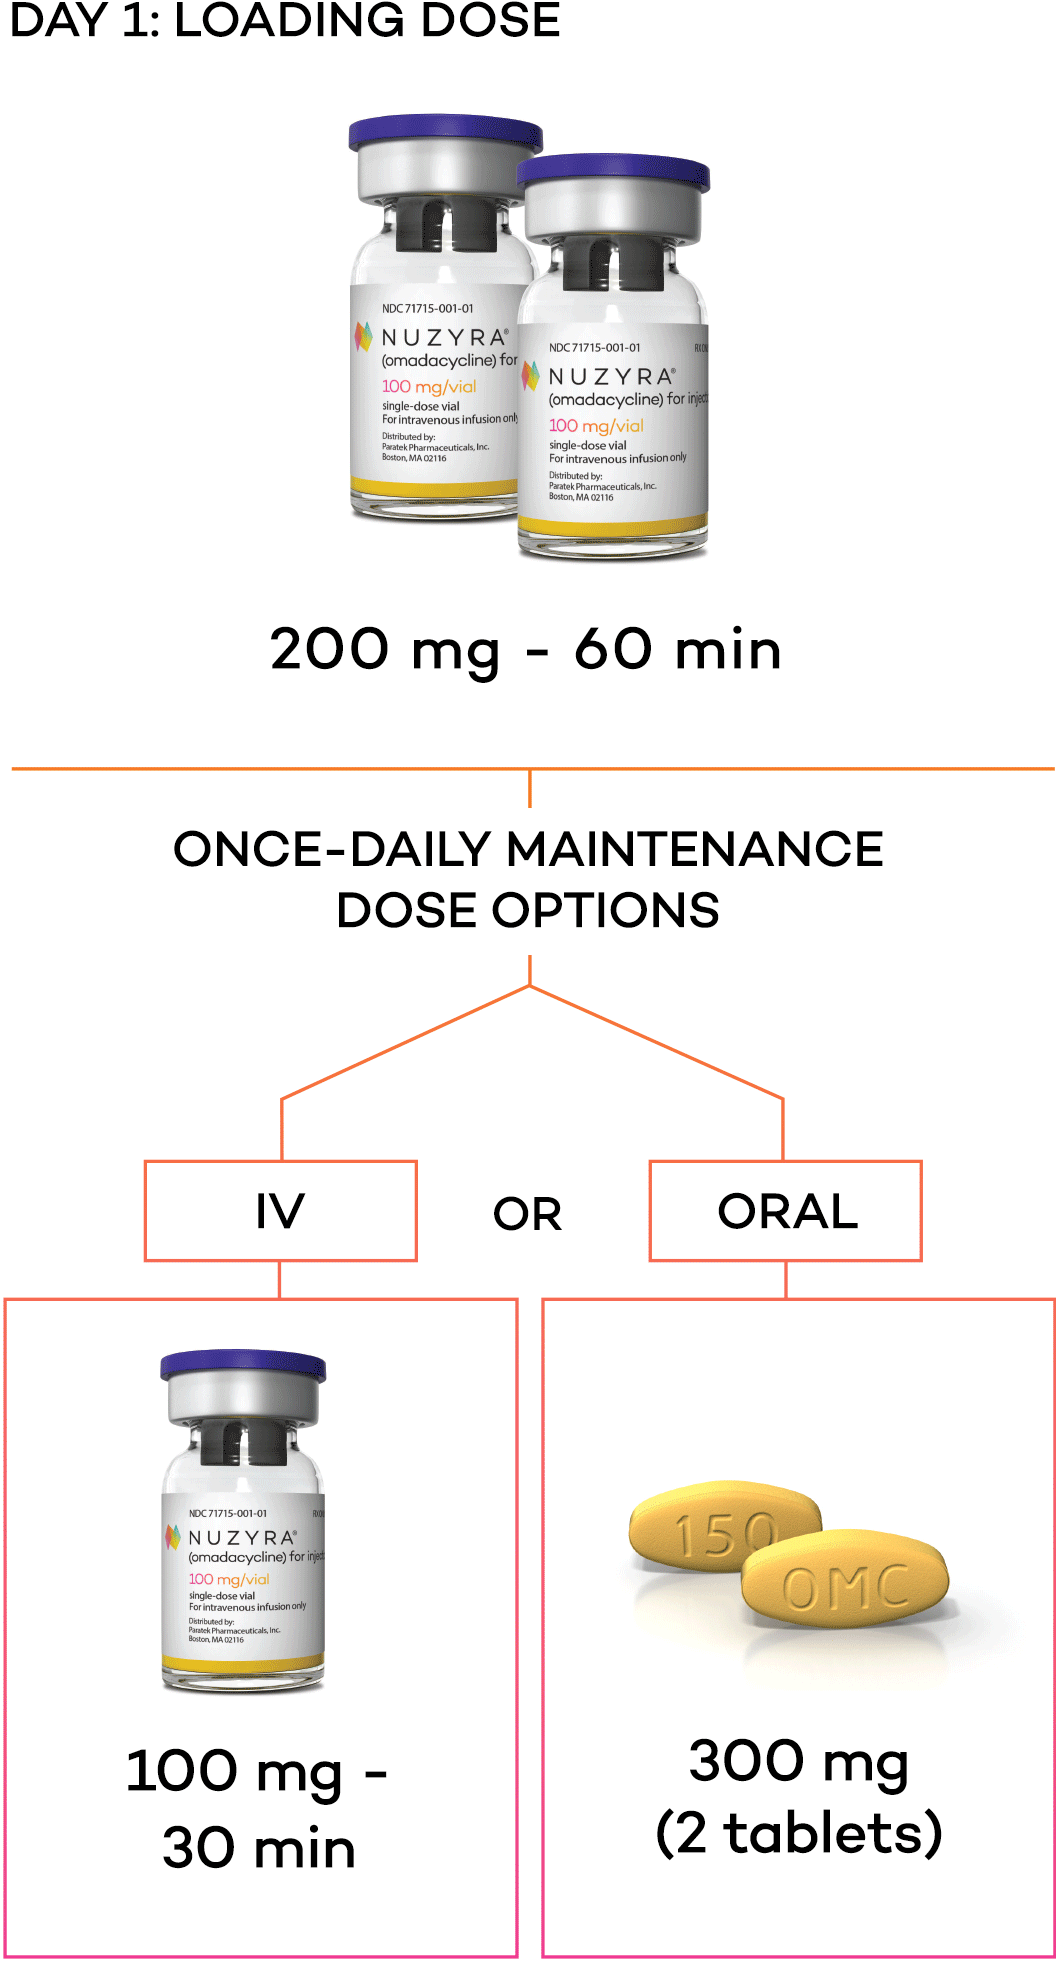 IV loading dose: 2 vials of NUZYRA 100 mg for a 60-minute 200 mg IV infusion on Day 1 followed by 1 vial of NUZYRA 100 mg for a once-daily 30-minute IV infusion maintenance dose OR 2 NUZYRA 150 mg tablets for a 300 mg once-daily oral maintenance dose. For additional dosage information, please see Full Prescribing Information, including Table 1.